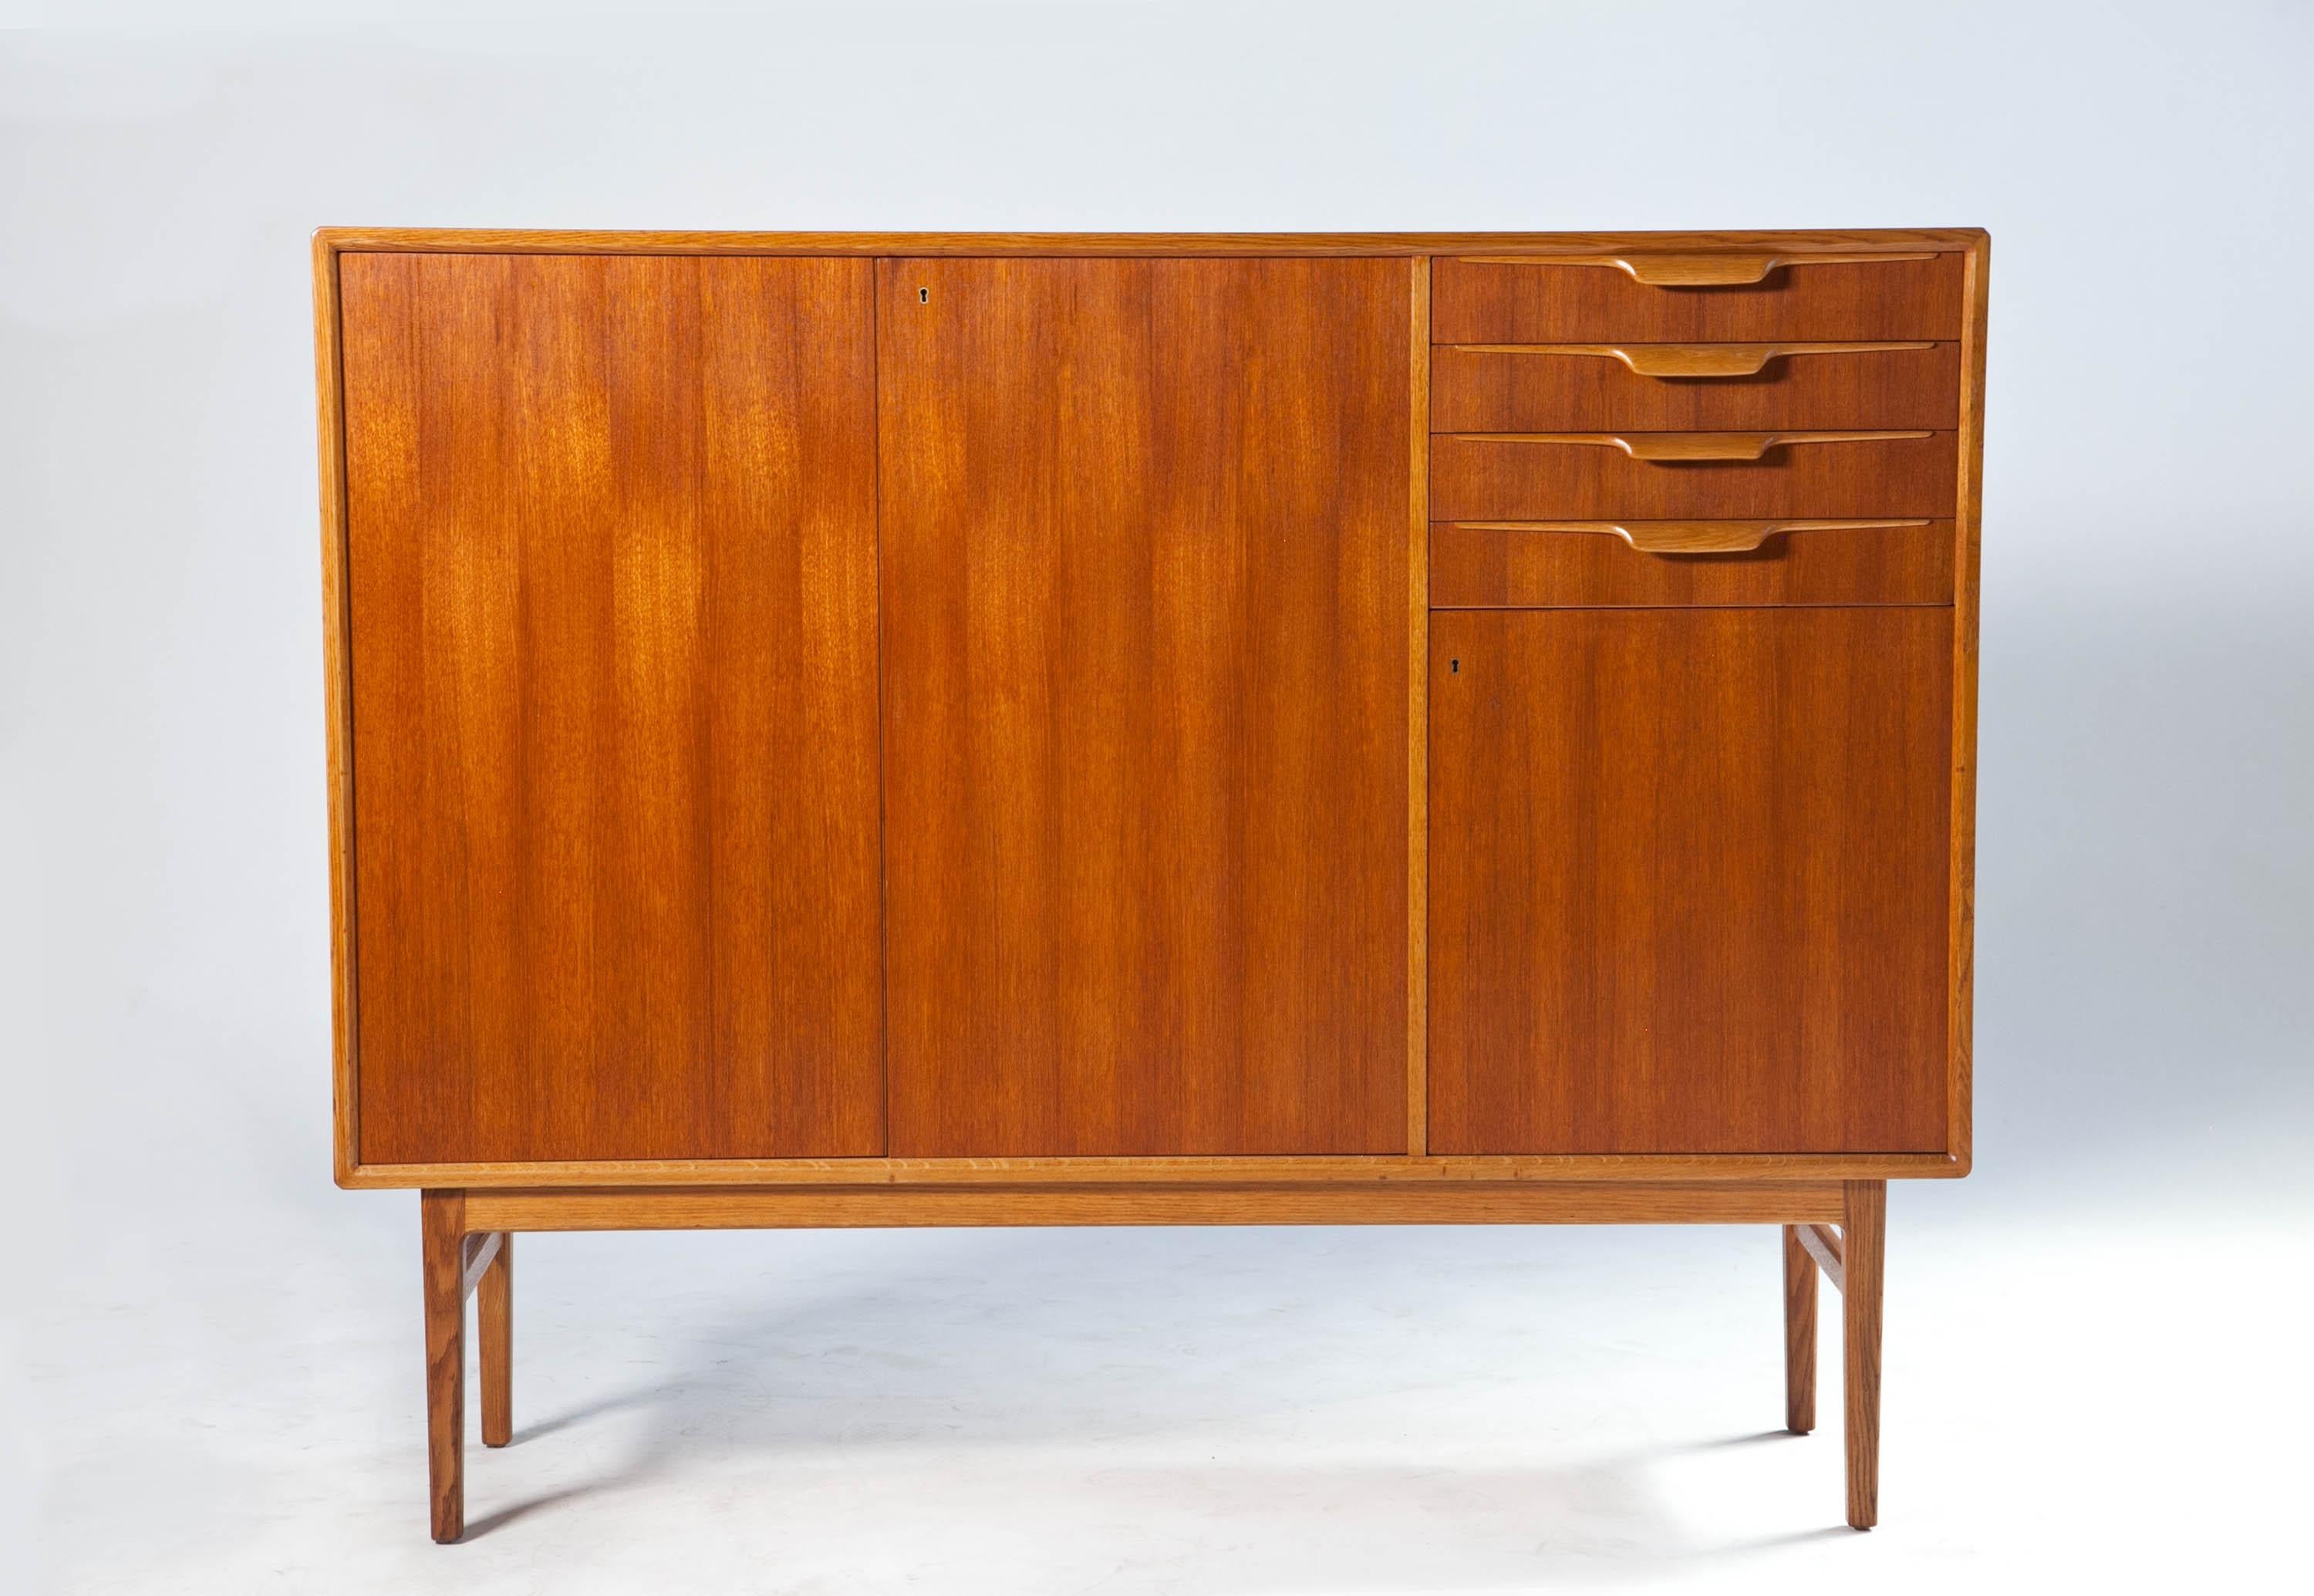 Bertil Fridhagen teak high sideboard for Bodafors Sweden 1950's

1950s teak cabinet lined with Oak trim and with white lacquered interior with two doors with 4 drawers. Key included.

Measures: Height 120 cm, Depth 42 cm, Width 150 cm
Height 47